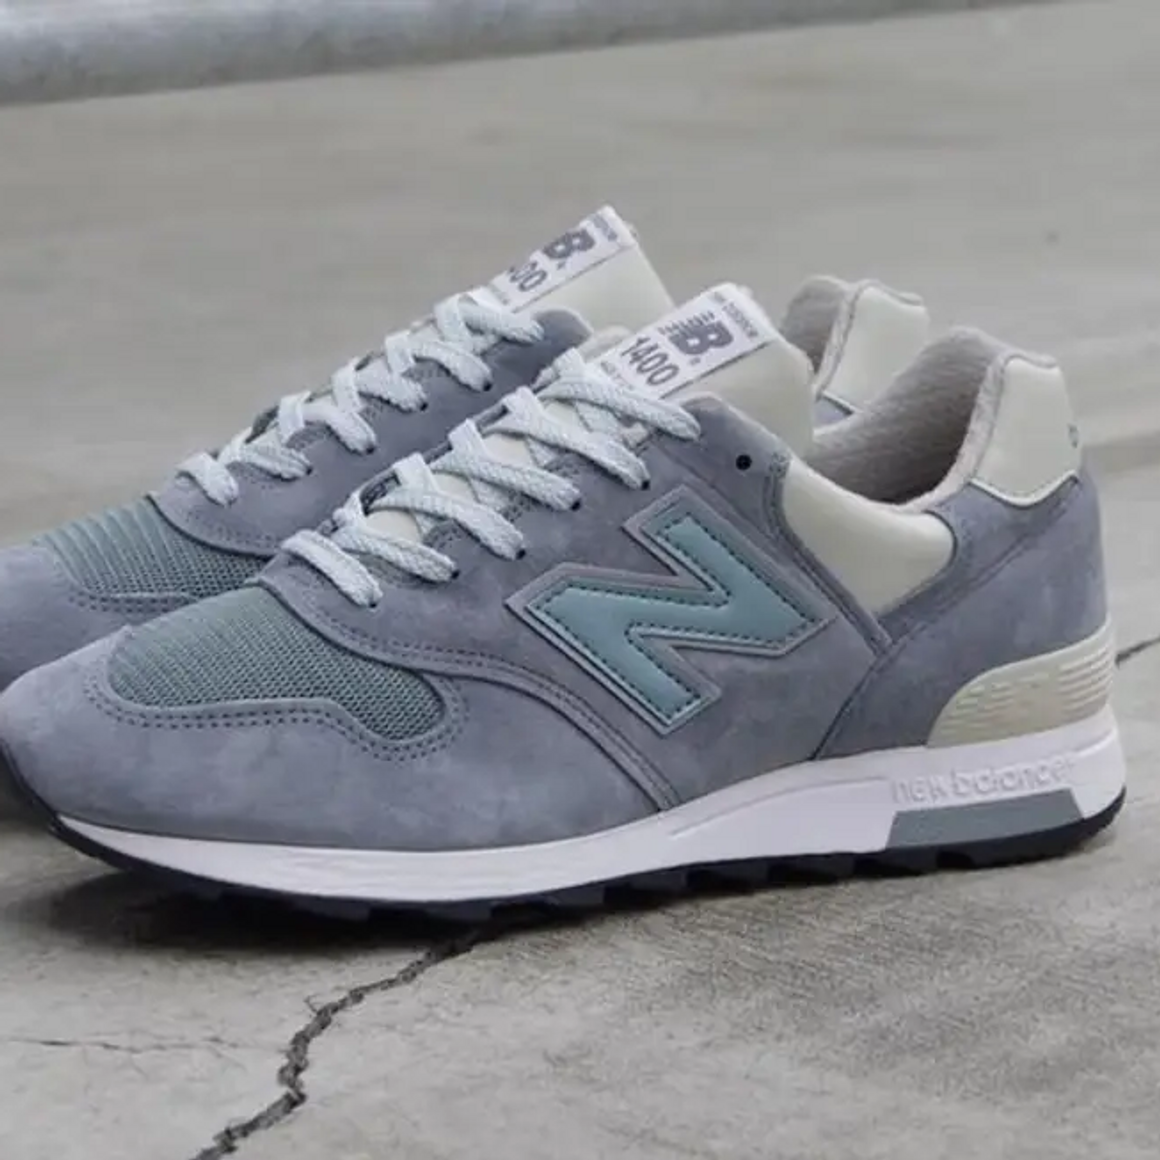 A Classic New Balance 1400 Colourway Hits the Raffles